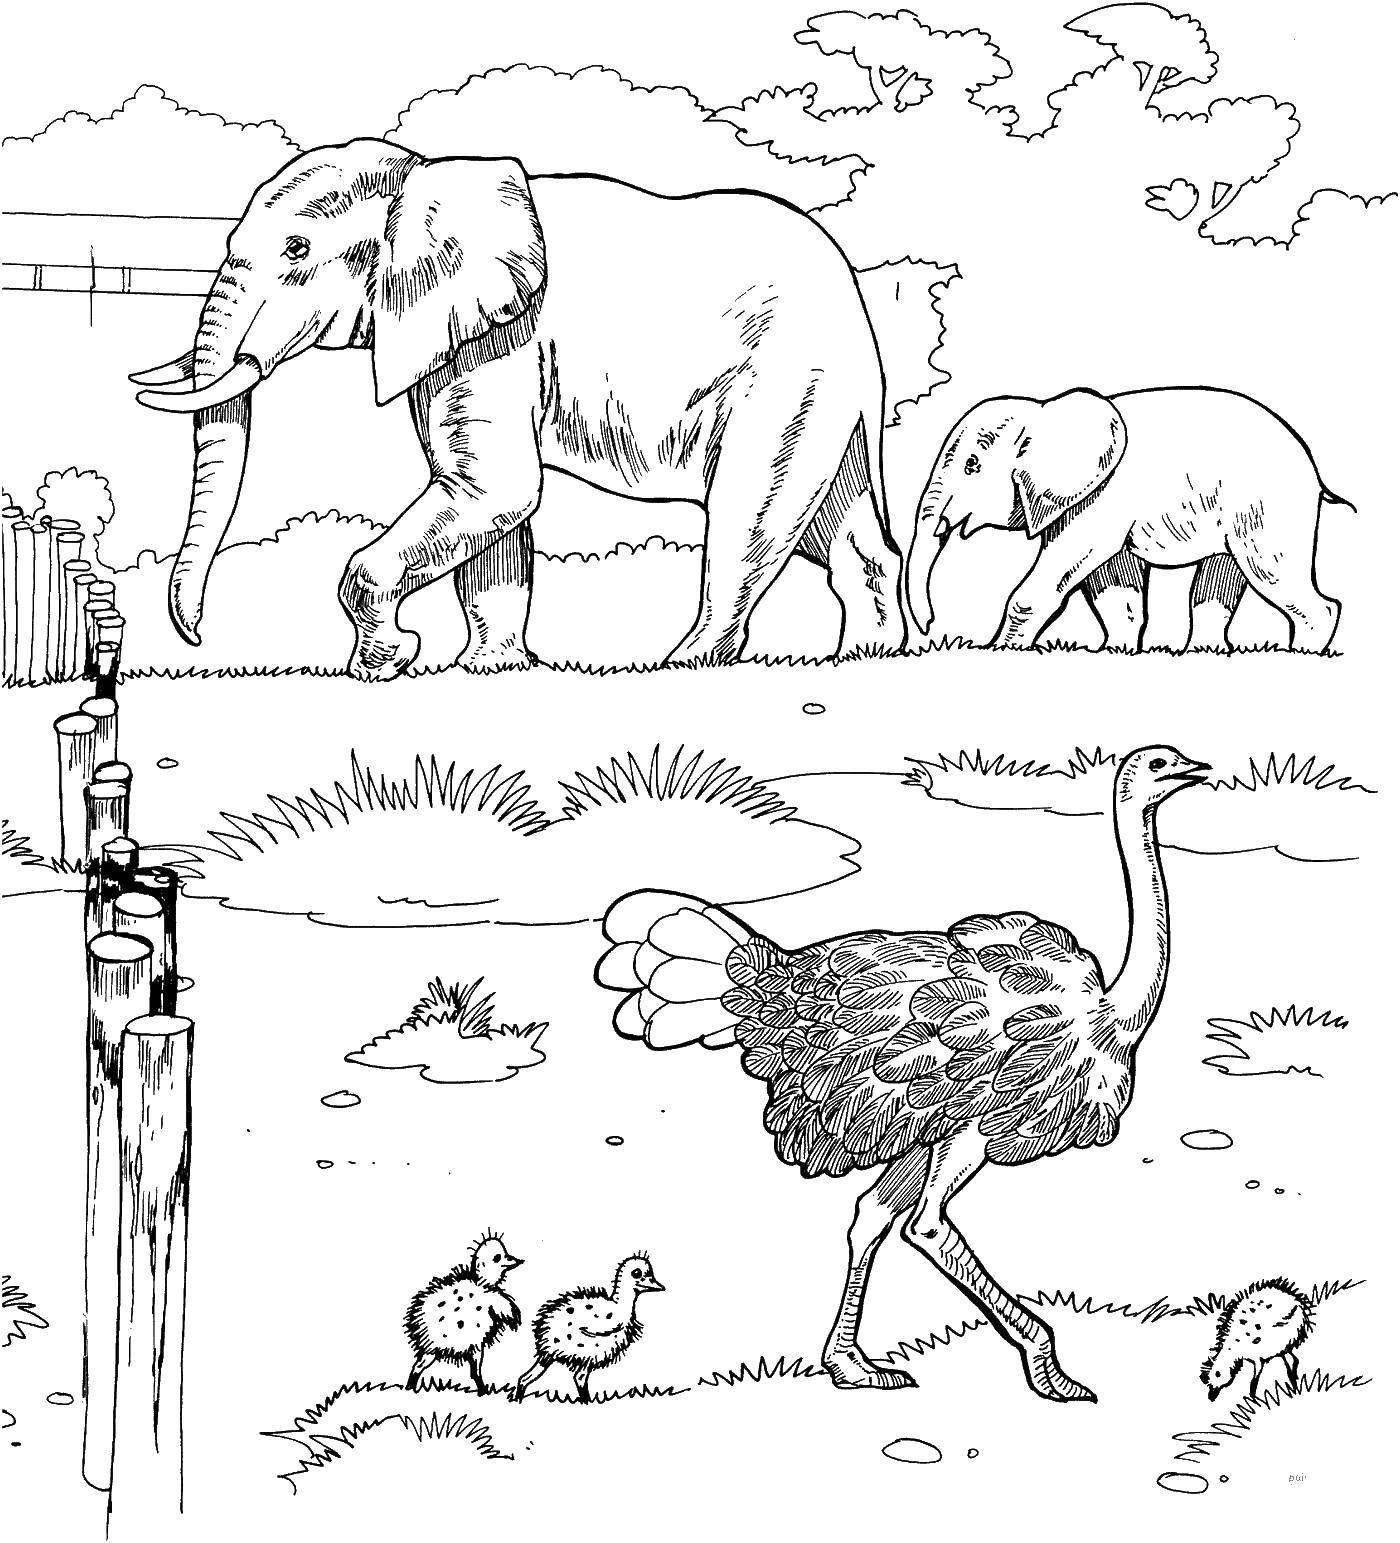 Coloring The ostrich and the elephant. Category Animals. Tags:  ostrich, elephant, elephant.